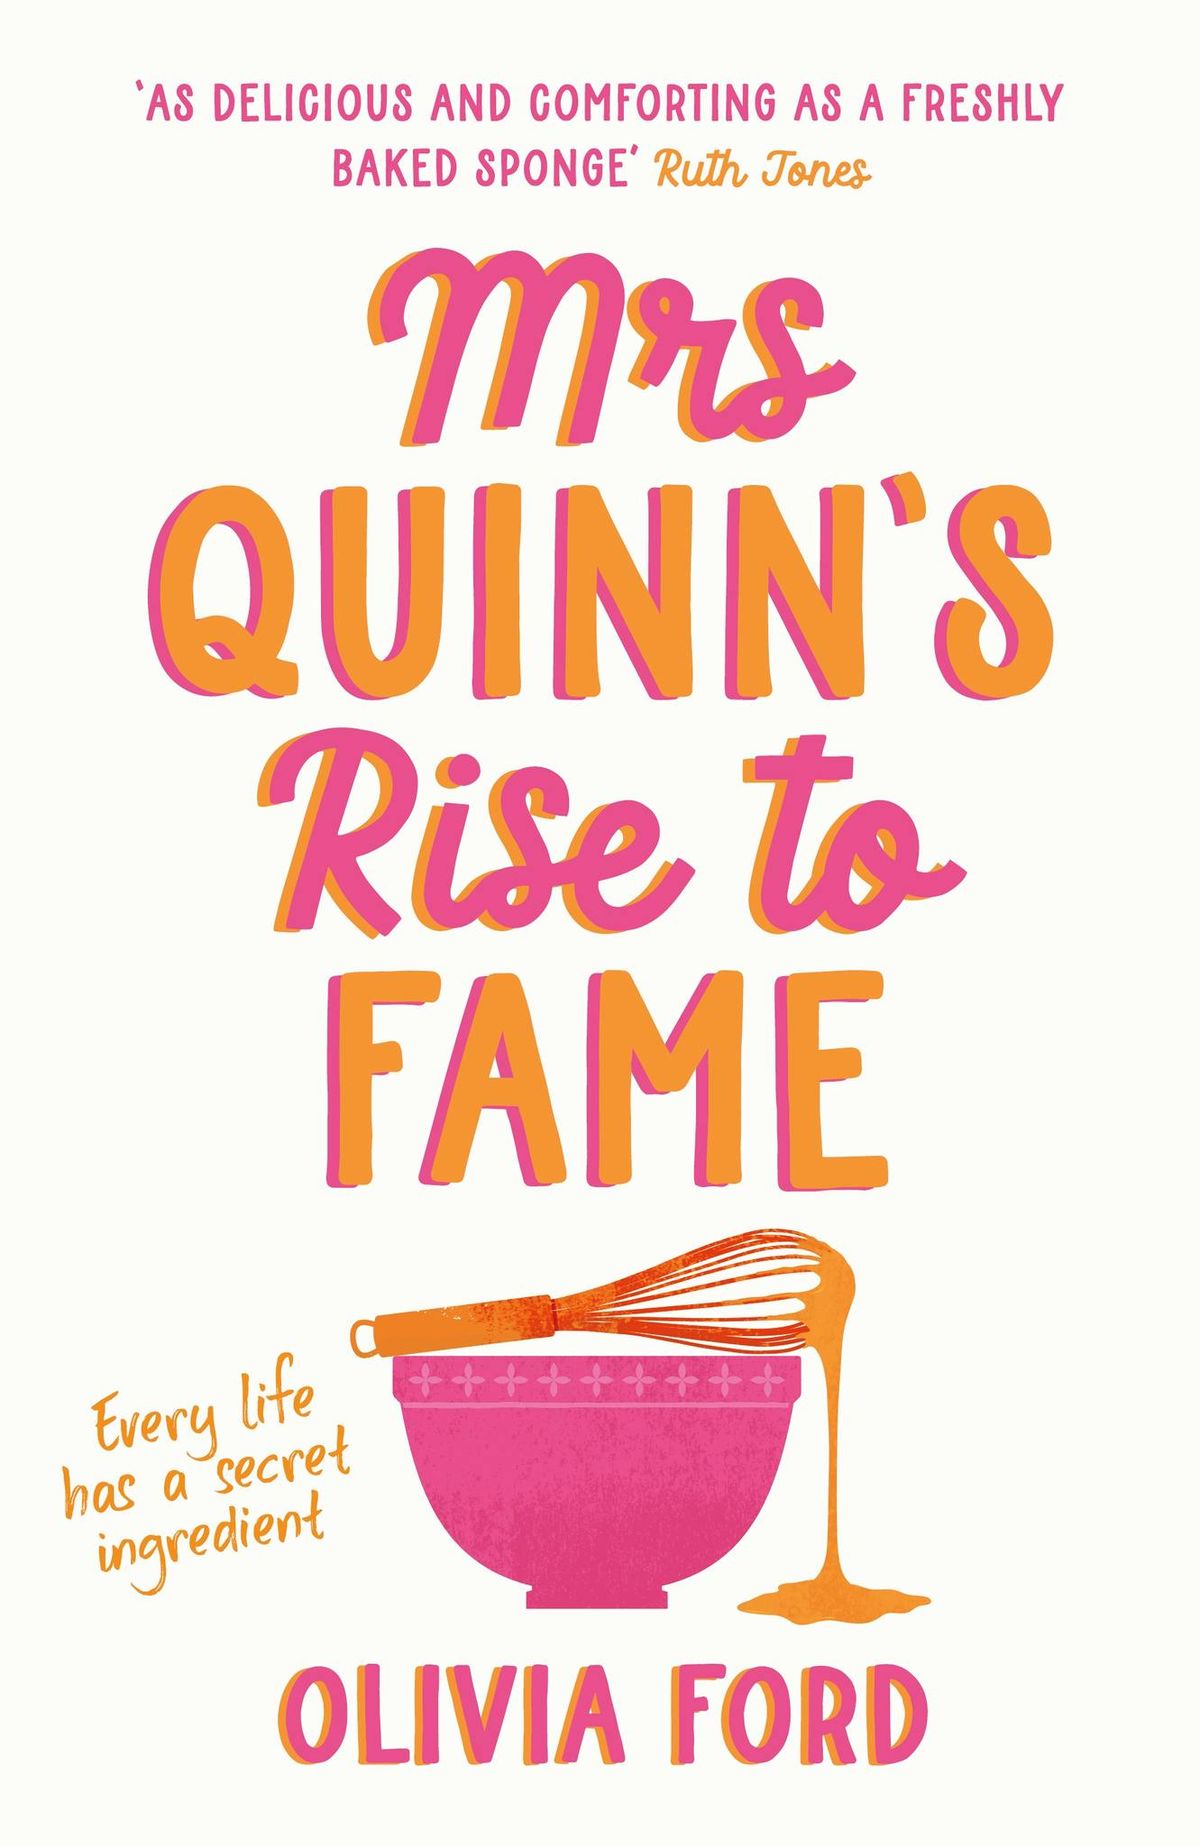 Afternoon Tea with Olivia Ford - Mrs Quinn's Rise to Fame TICKET SALES NOW CLOSED